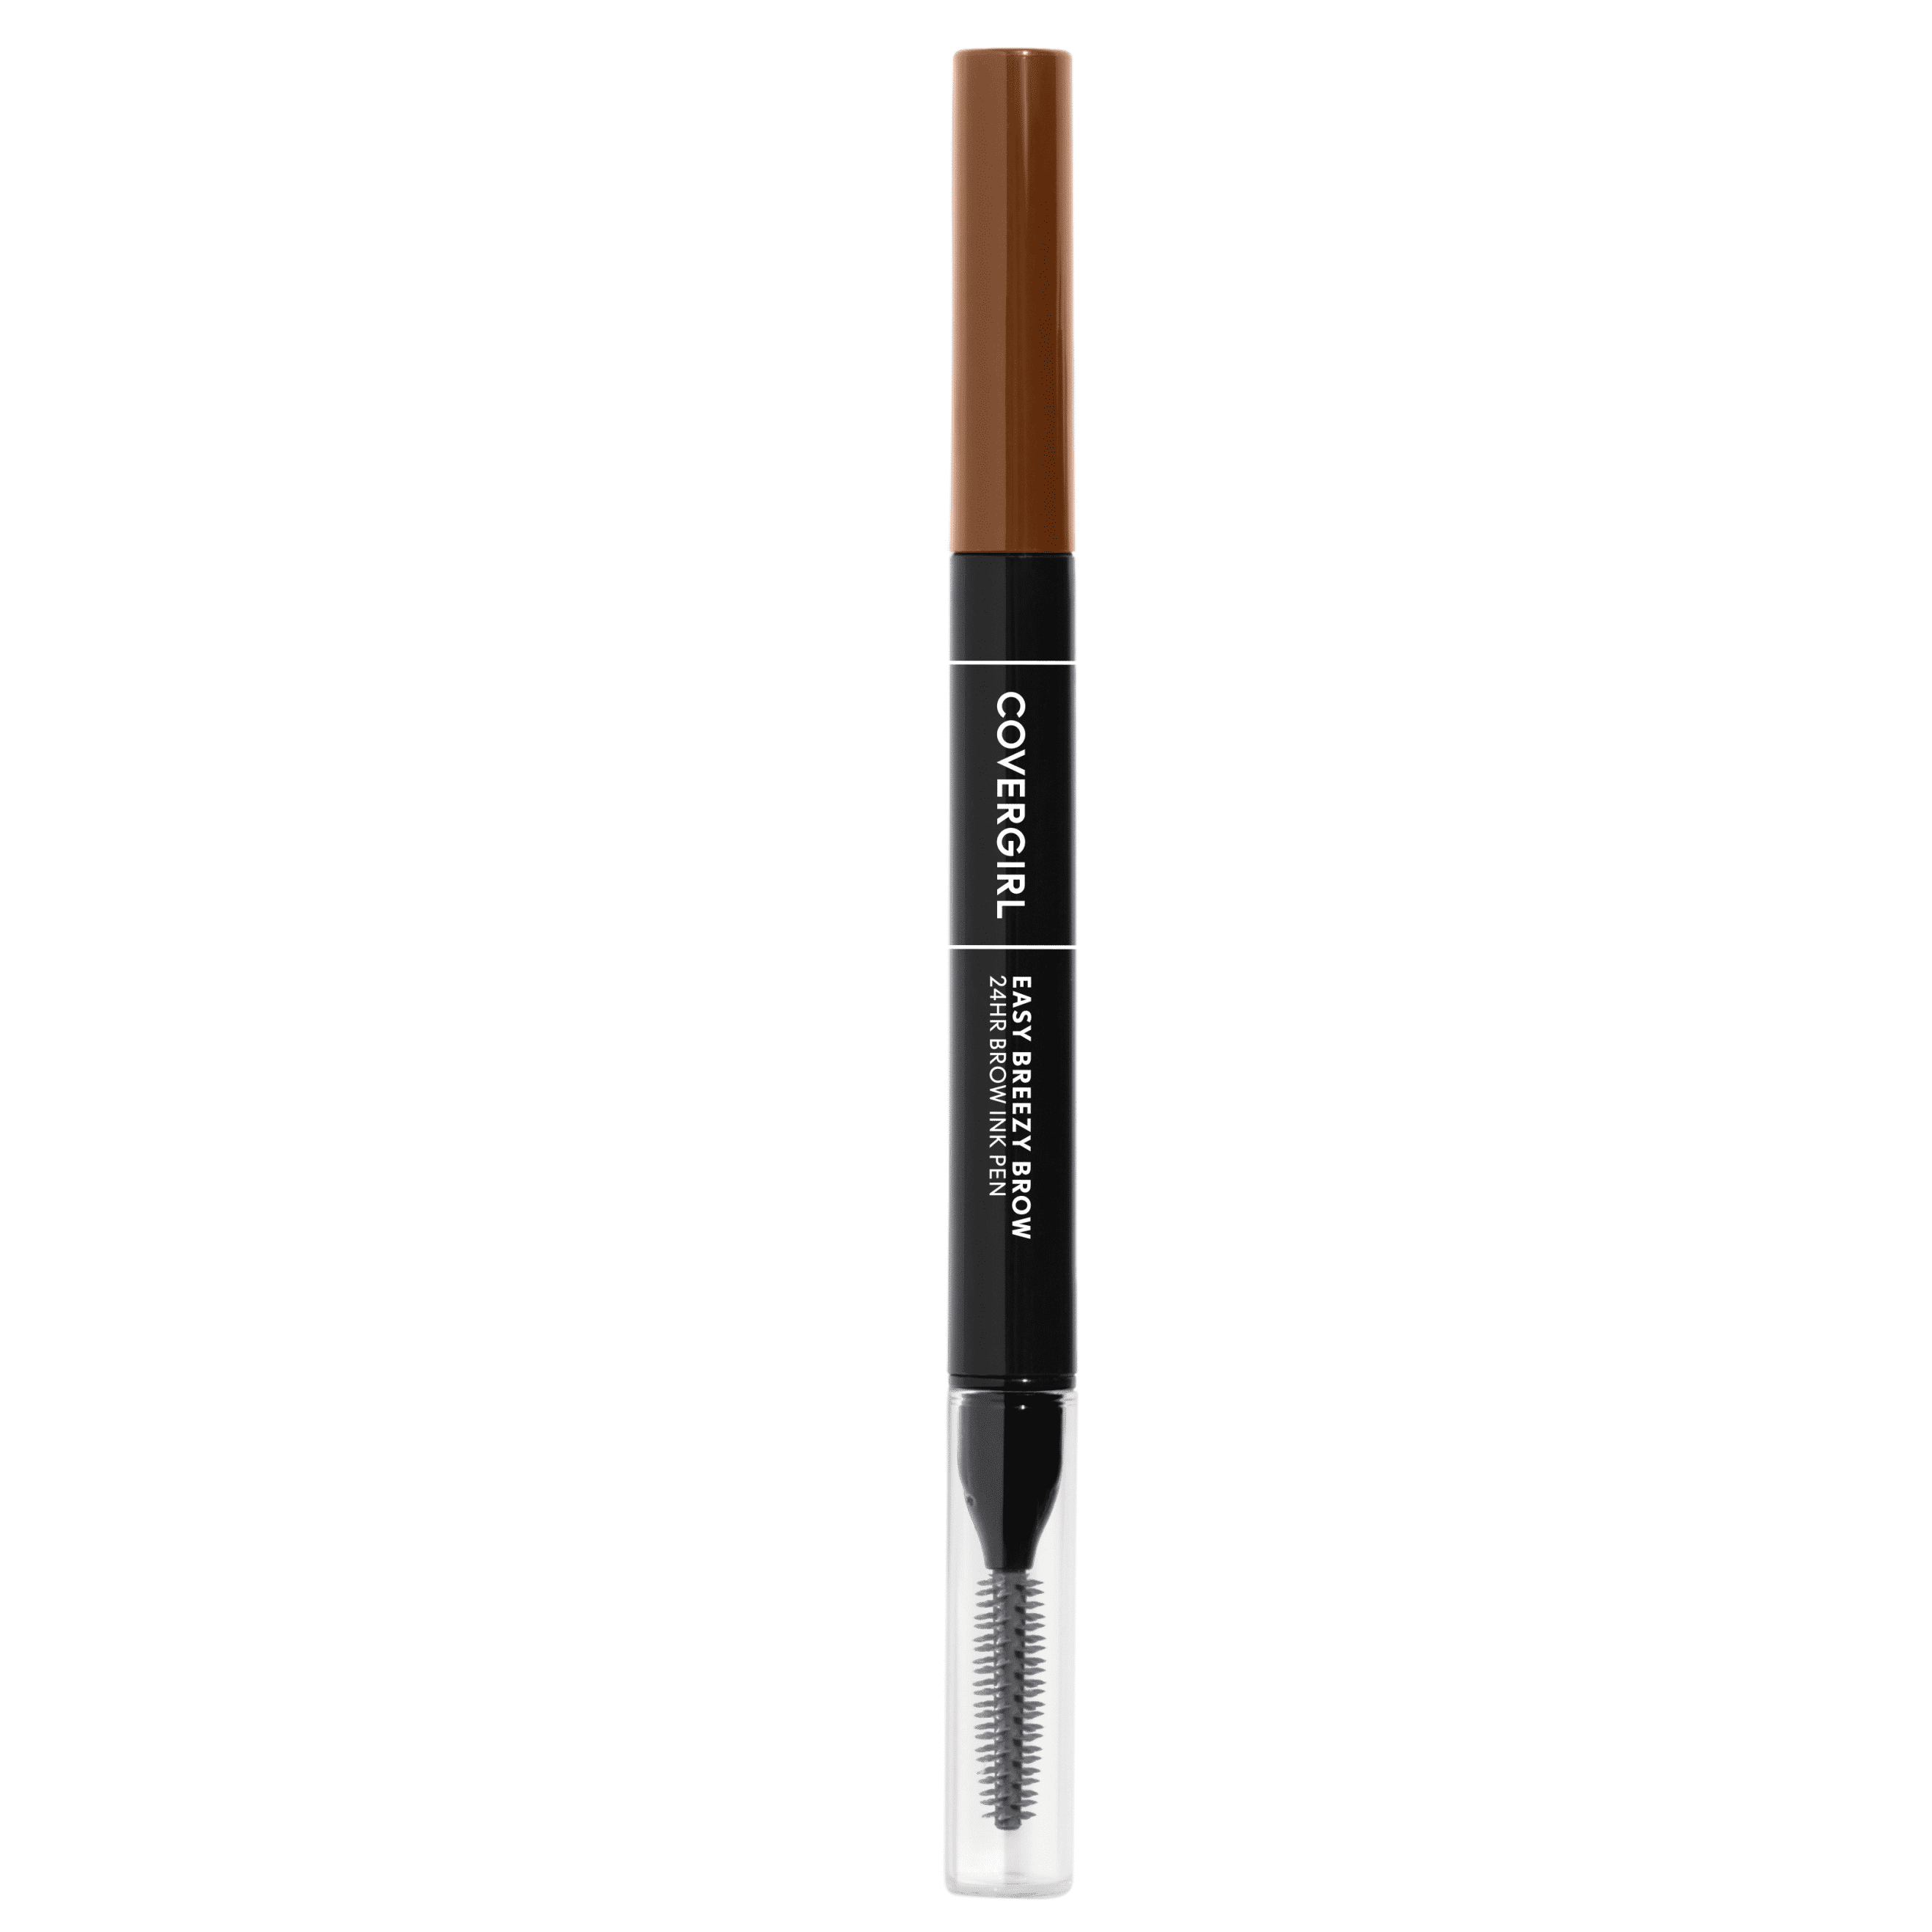 COVERGIRL Easy Breezy Brow All-Day Brow Ink Pen, 200 Honey Brown, 0.02 fl  oz, Eyebrows, Eyebrow Pencil, Brow Pencil, Matte, Eyebrow Enhancer,  Super-Fine Tip, Smudge Proof, Longlasting - DroneUp Delivery